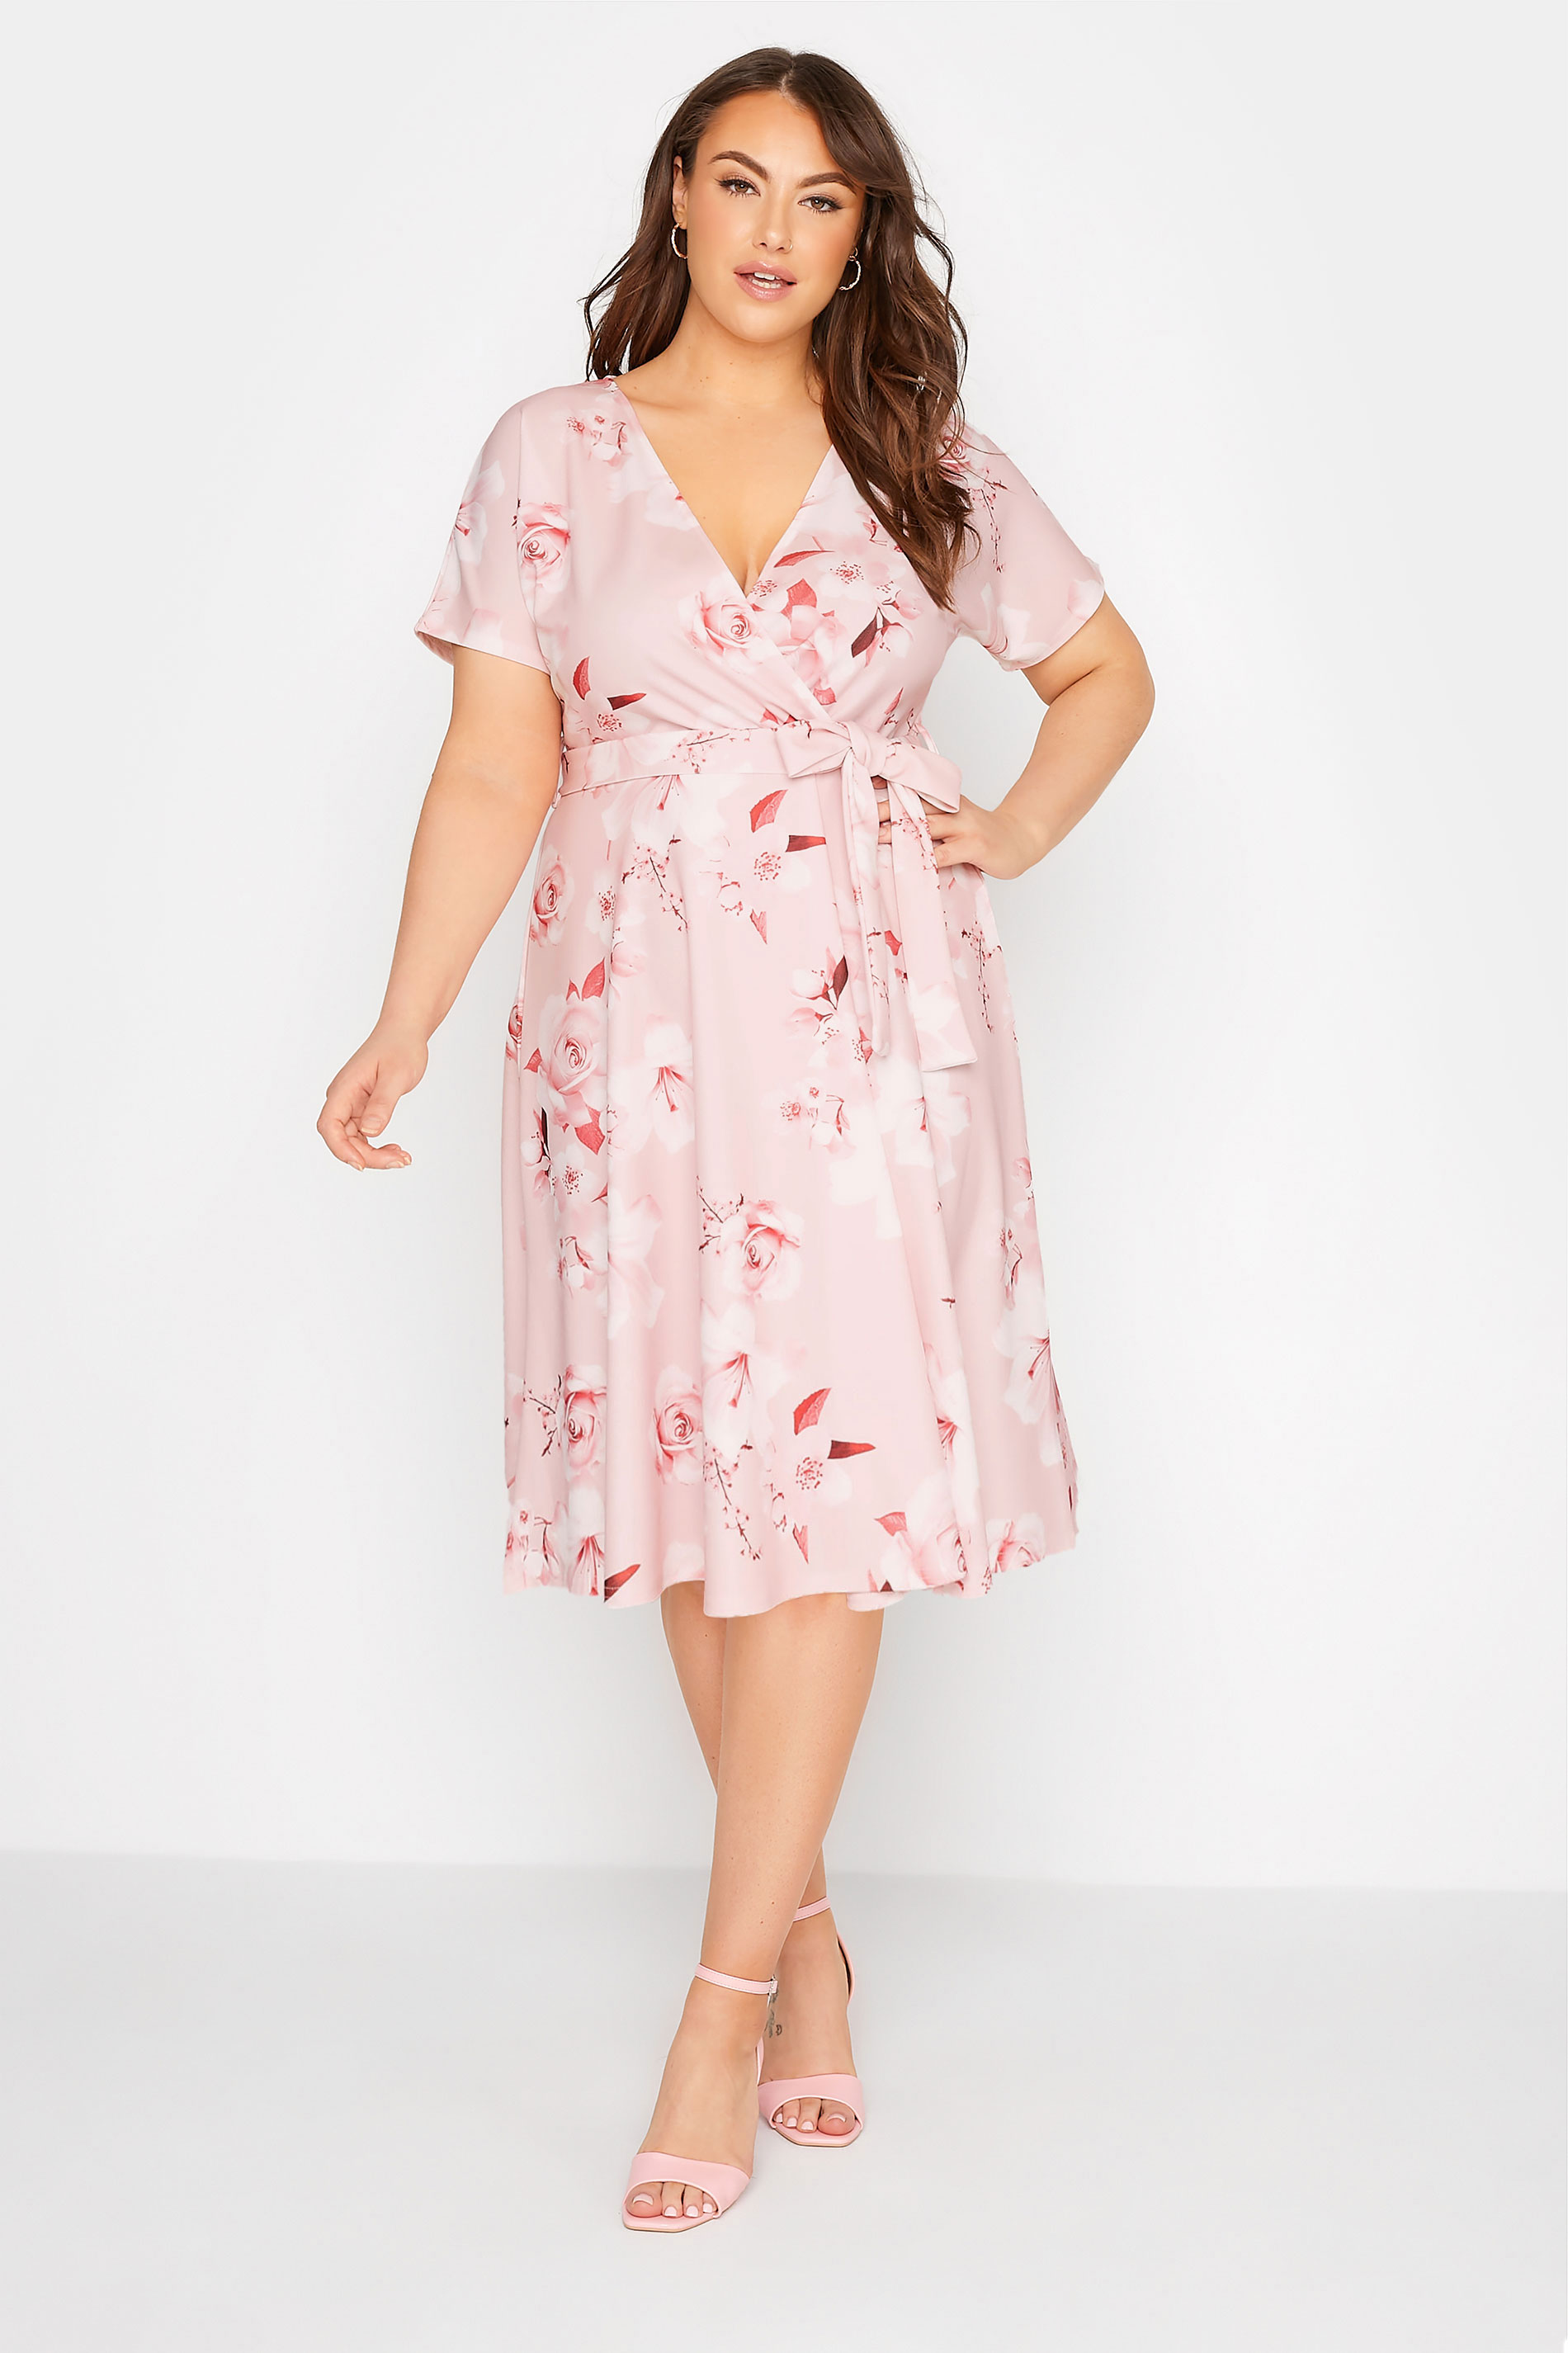 Robes Grande Taille Grande taille  Robes Patineuses | YOURS LONDON - Robe Rose Pâle Floral Cache-Coeur - XD54305